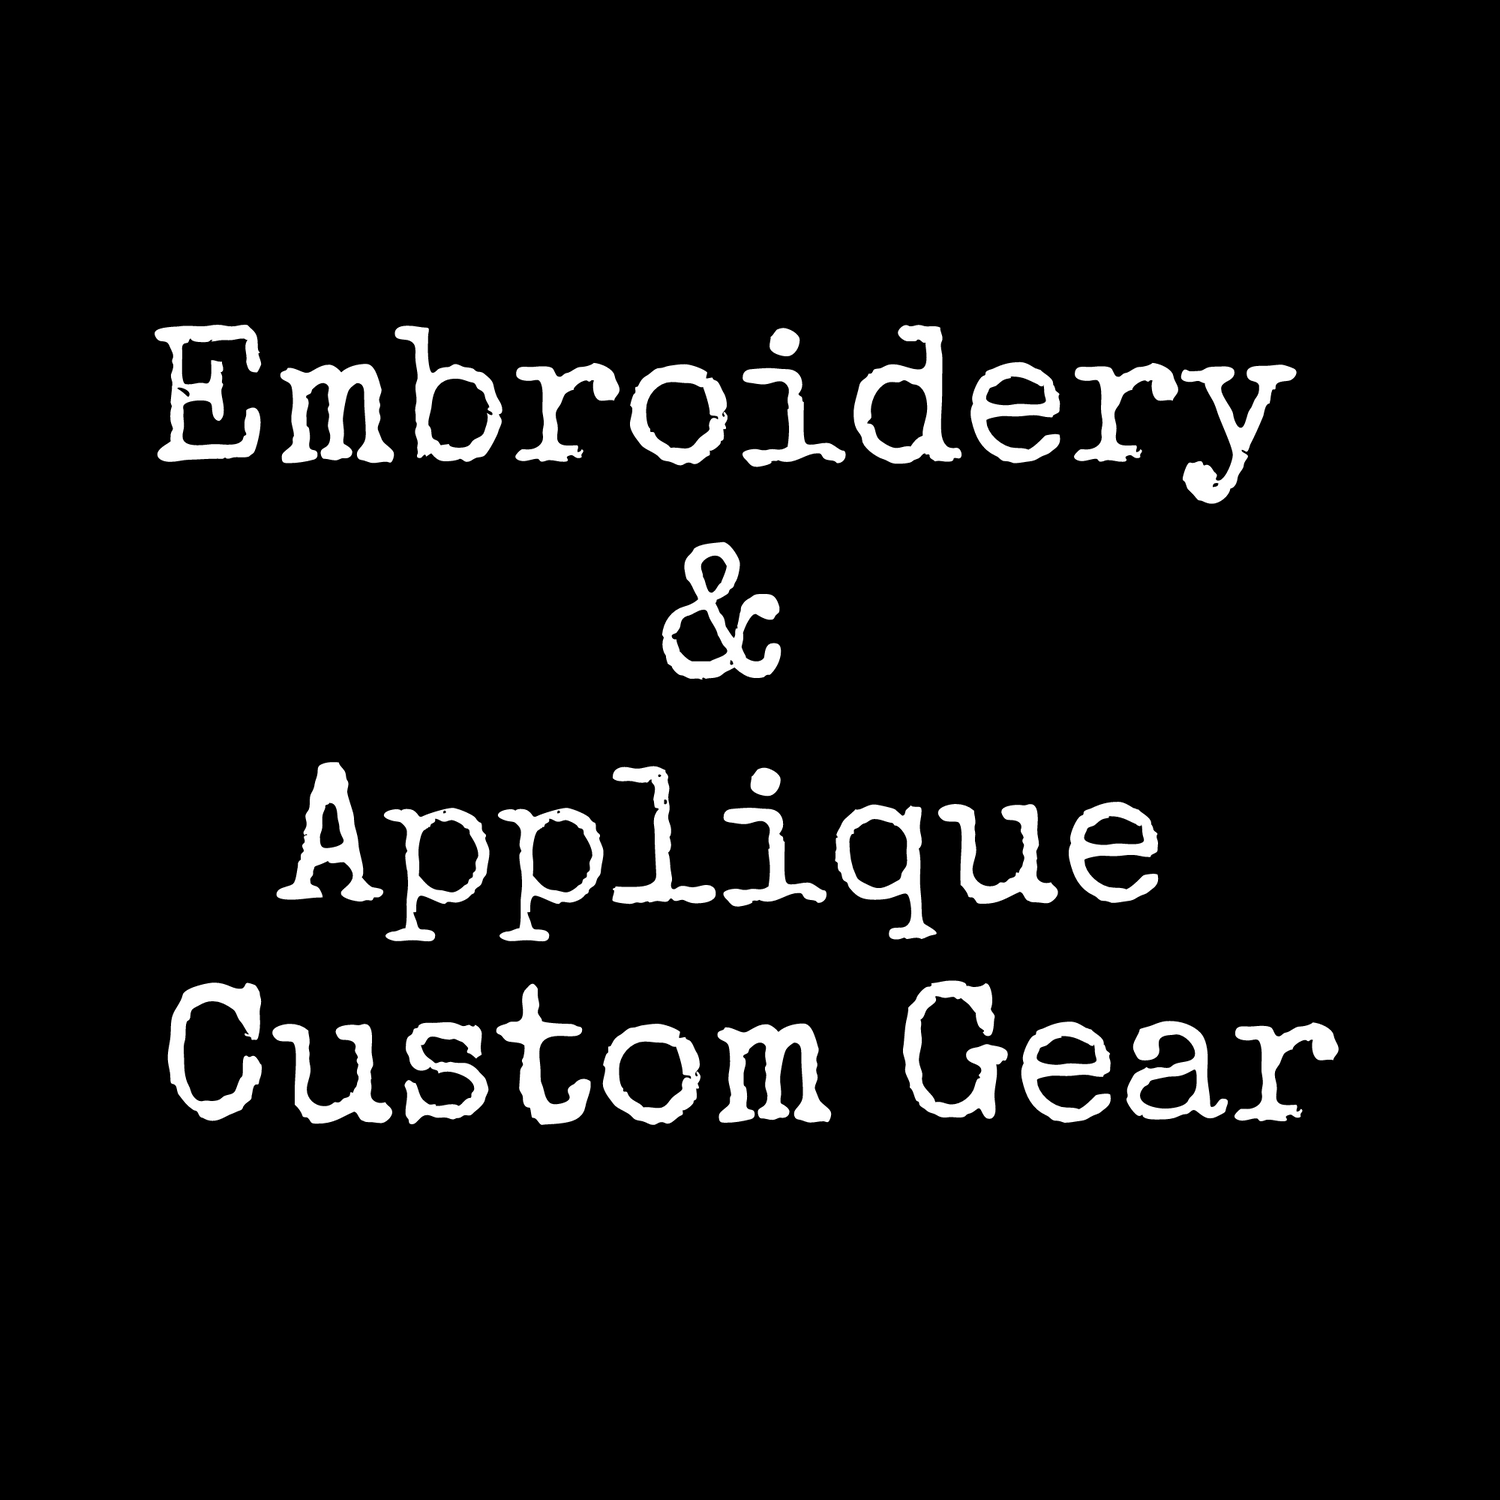 Embroidery and Applique Customs